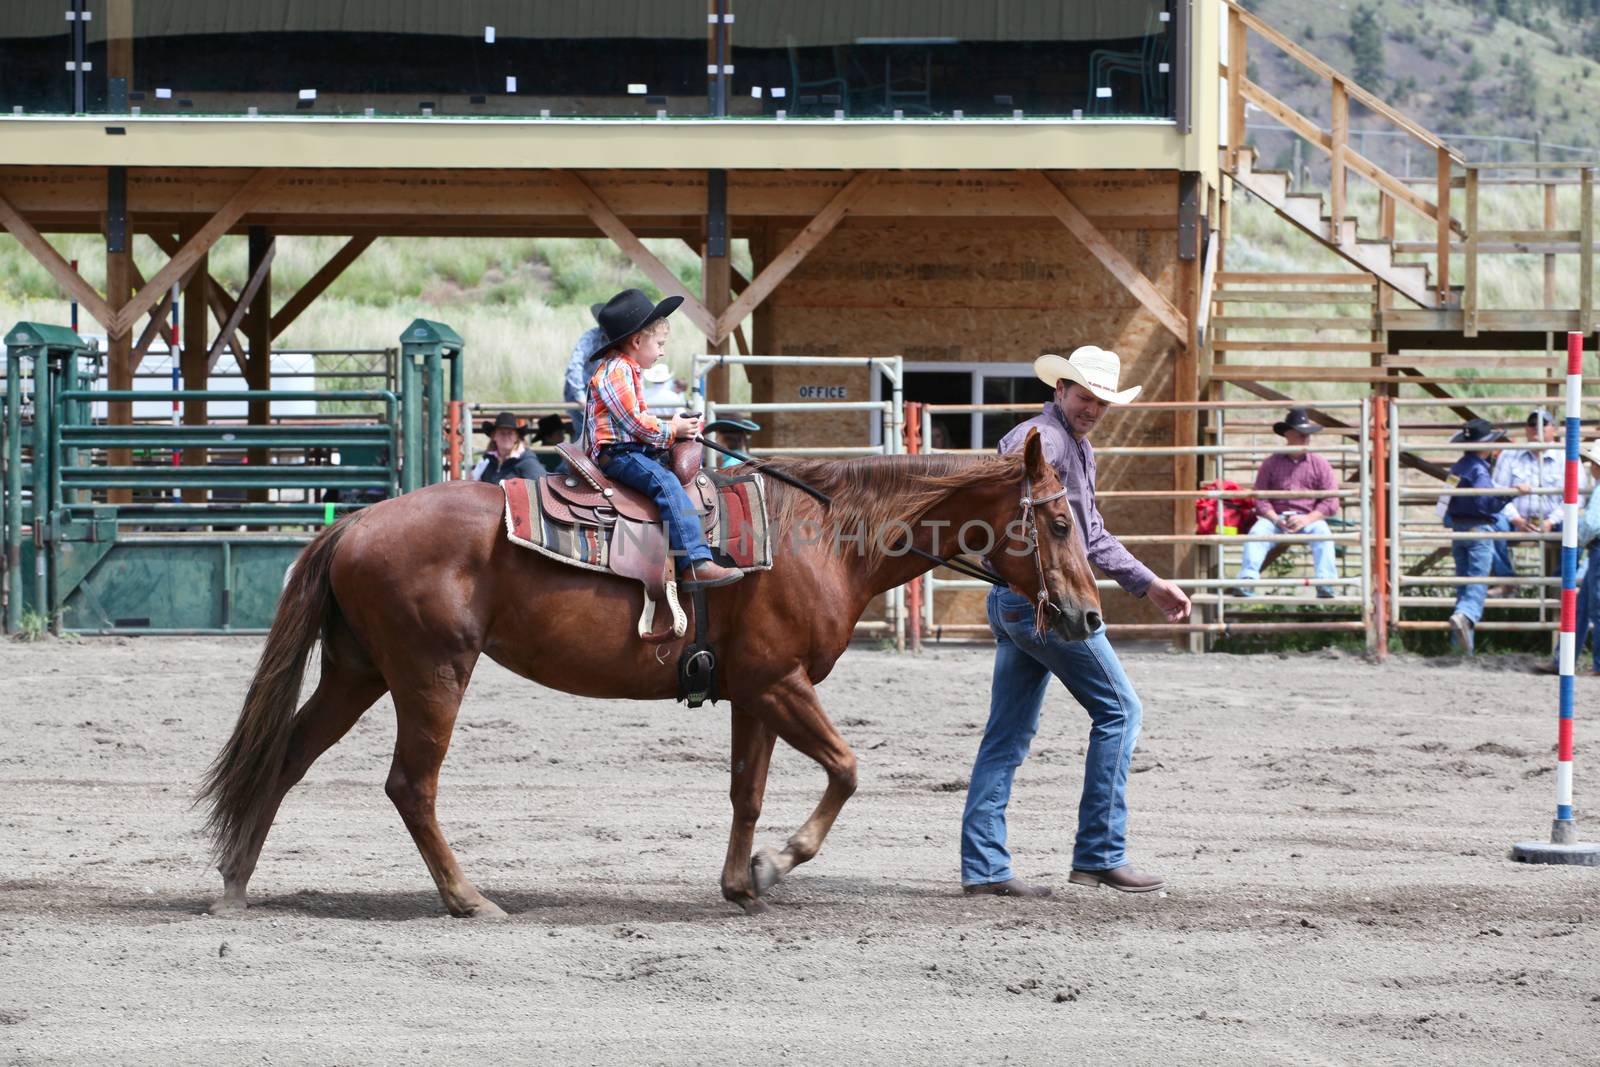 MERRITT, B.c. CANADA - June 14:  Young cowboy and his dad in stake race event at the Little Britches Rodeo June 14, 2014 in Merritt British Columbia, Canada